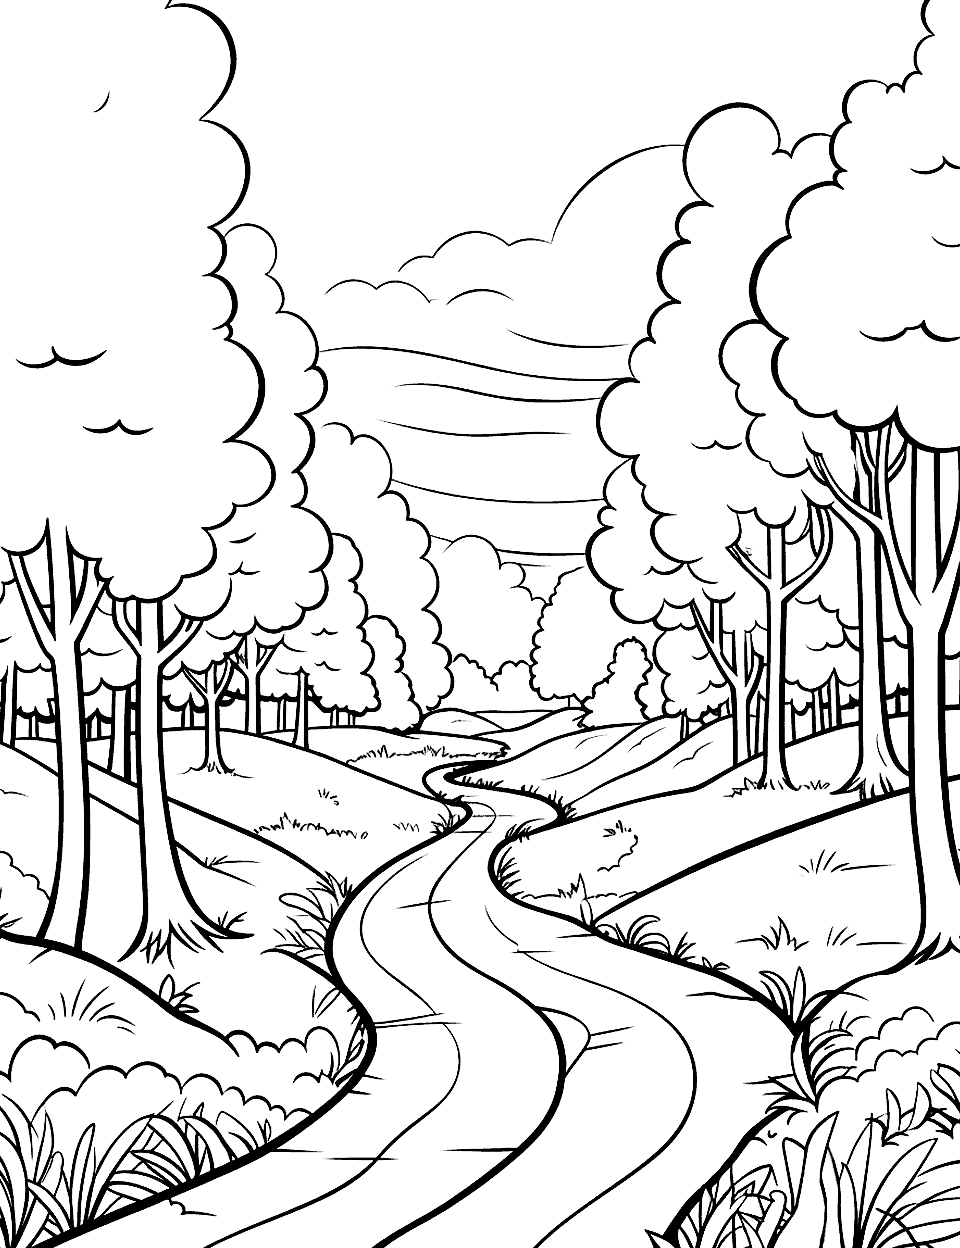 Enchanted Forest Path Nature Coloring Page - A winding path through a forest with towering trees.